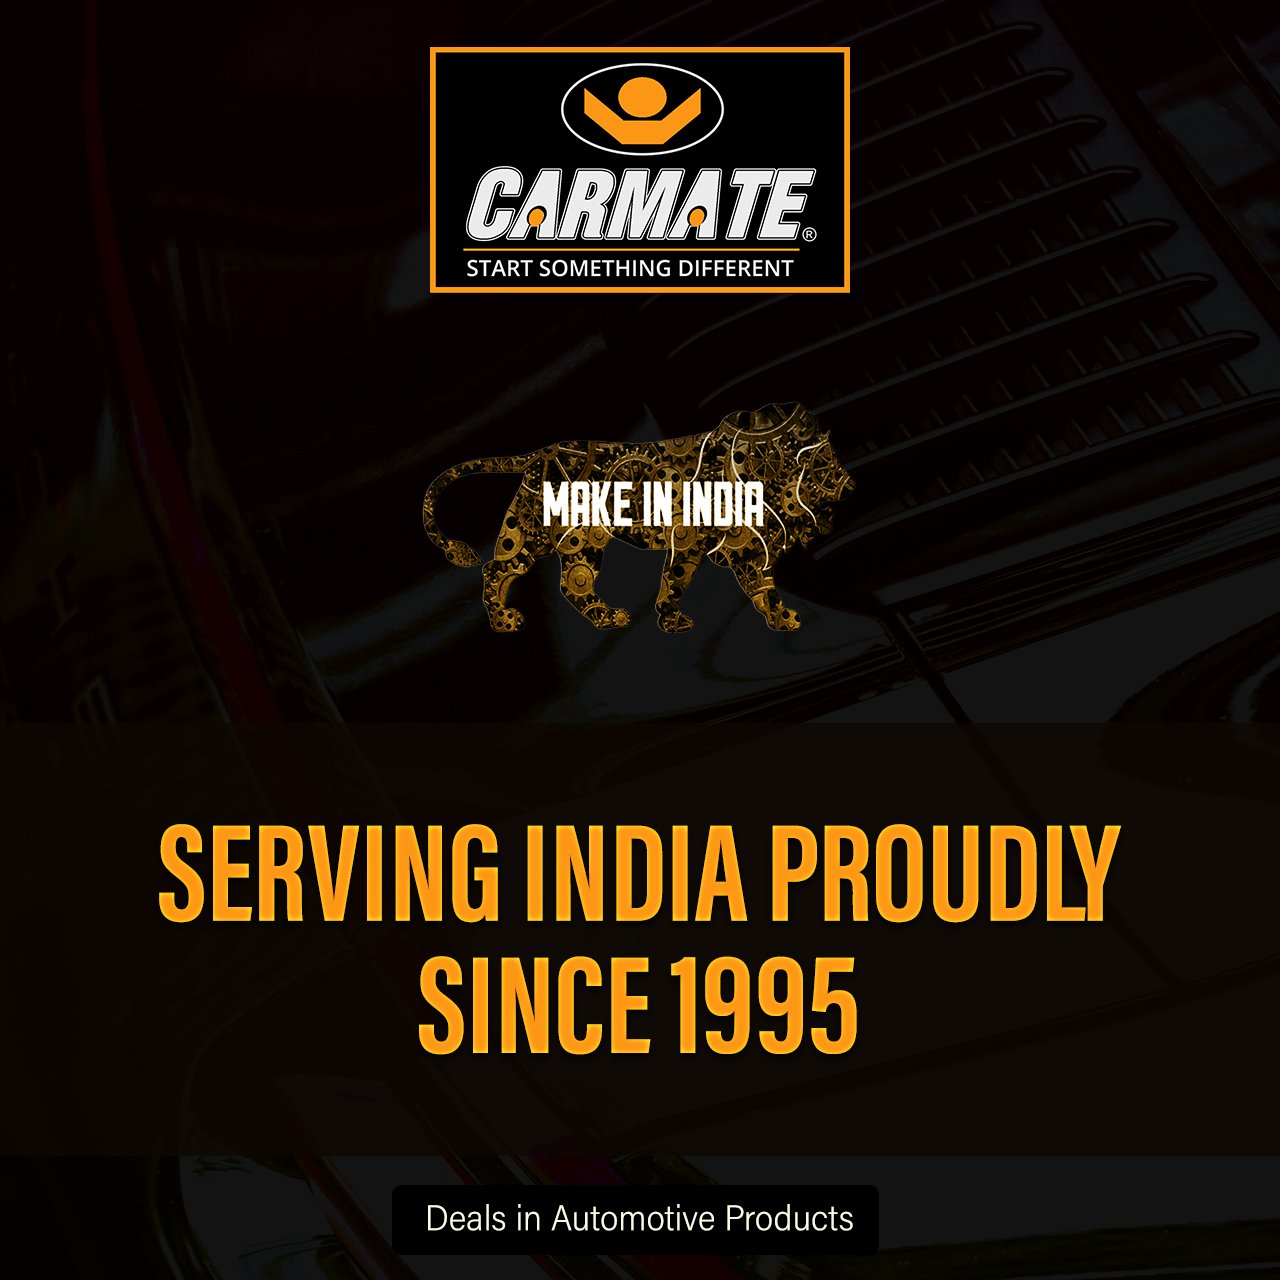 CARMATE Two Wheeler Cover For Royal Enfield Classic 350